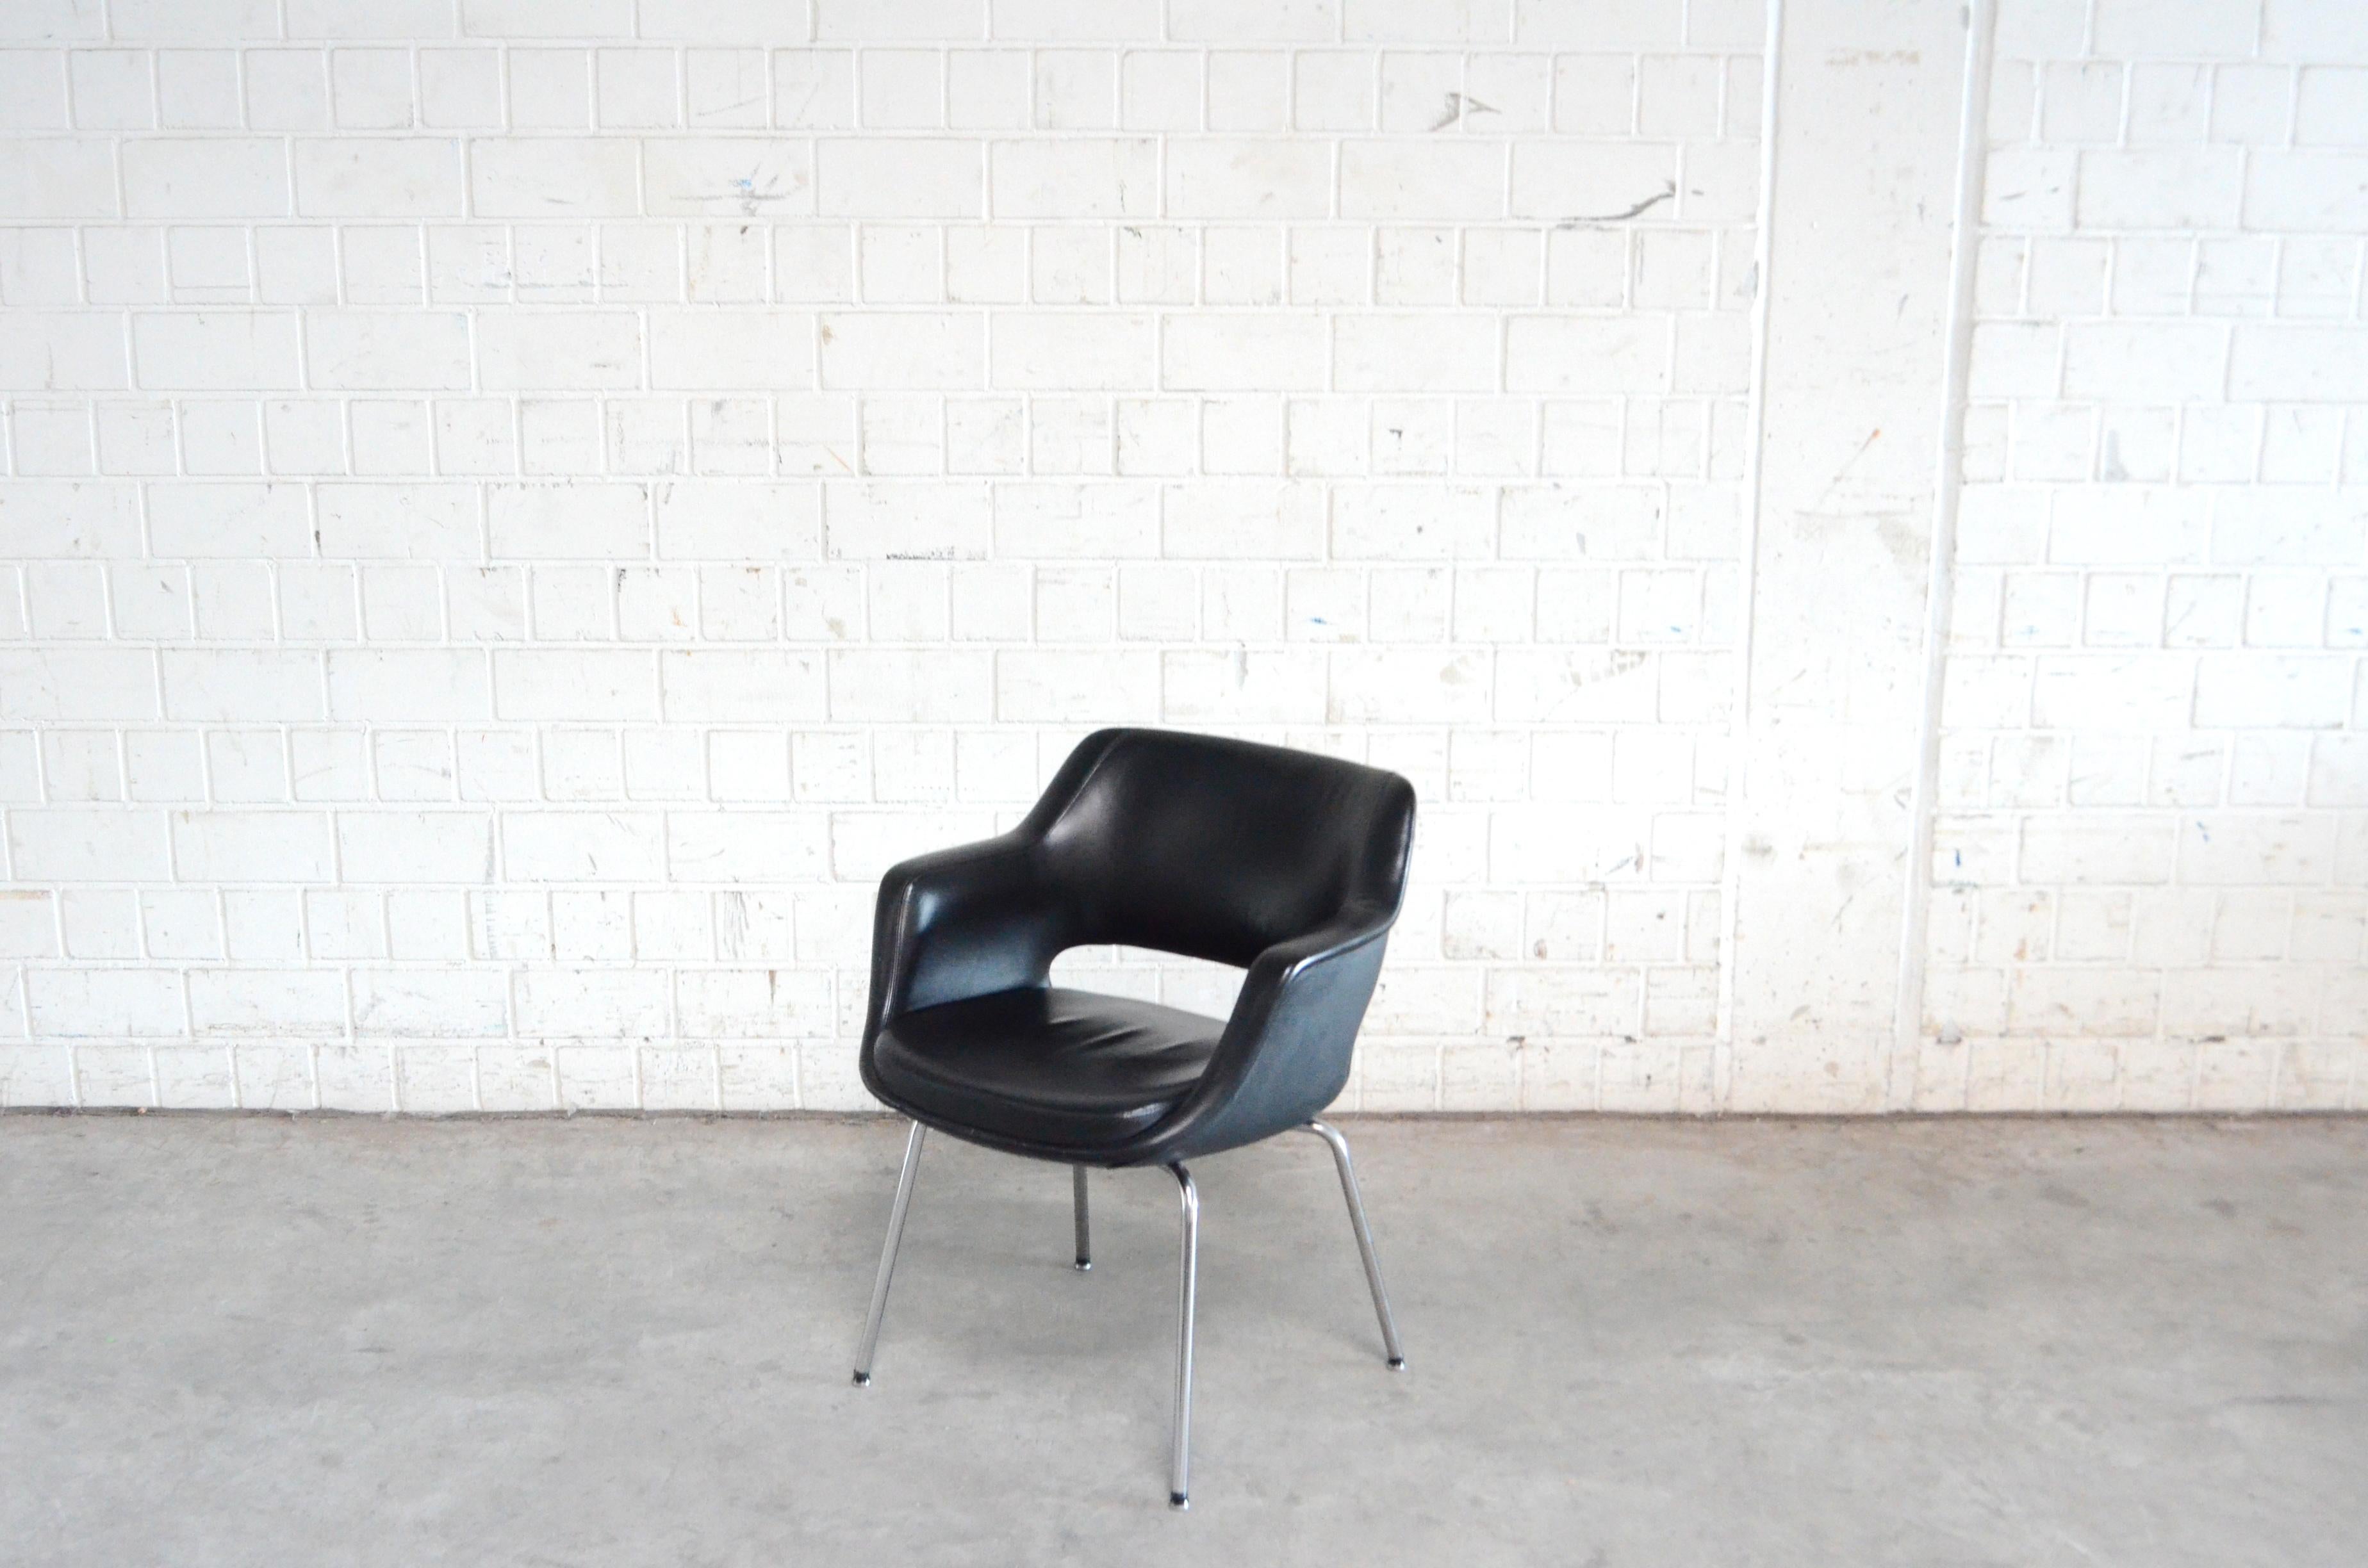 This model Kilta was designed by finland designer Olli Mannermaa for Martela in 1955.
The Kilta chair is a Finnish design classic. Kilta’s timeless design and comfortable seat guarantee its continuing popularity.
It is a popular vintage product